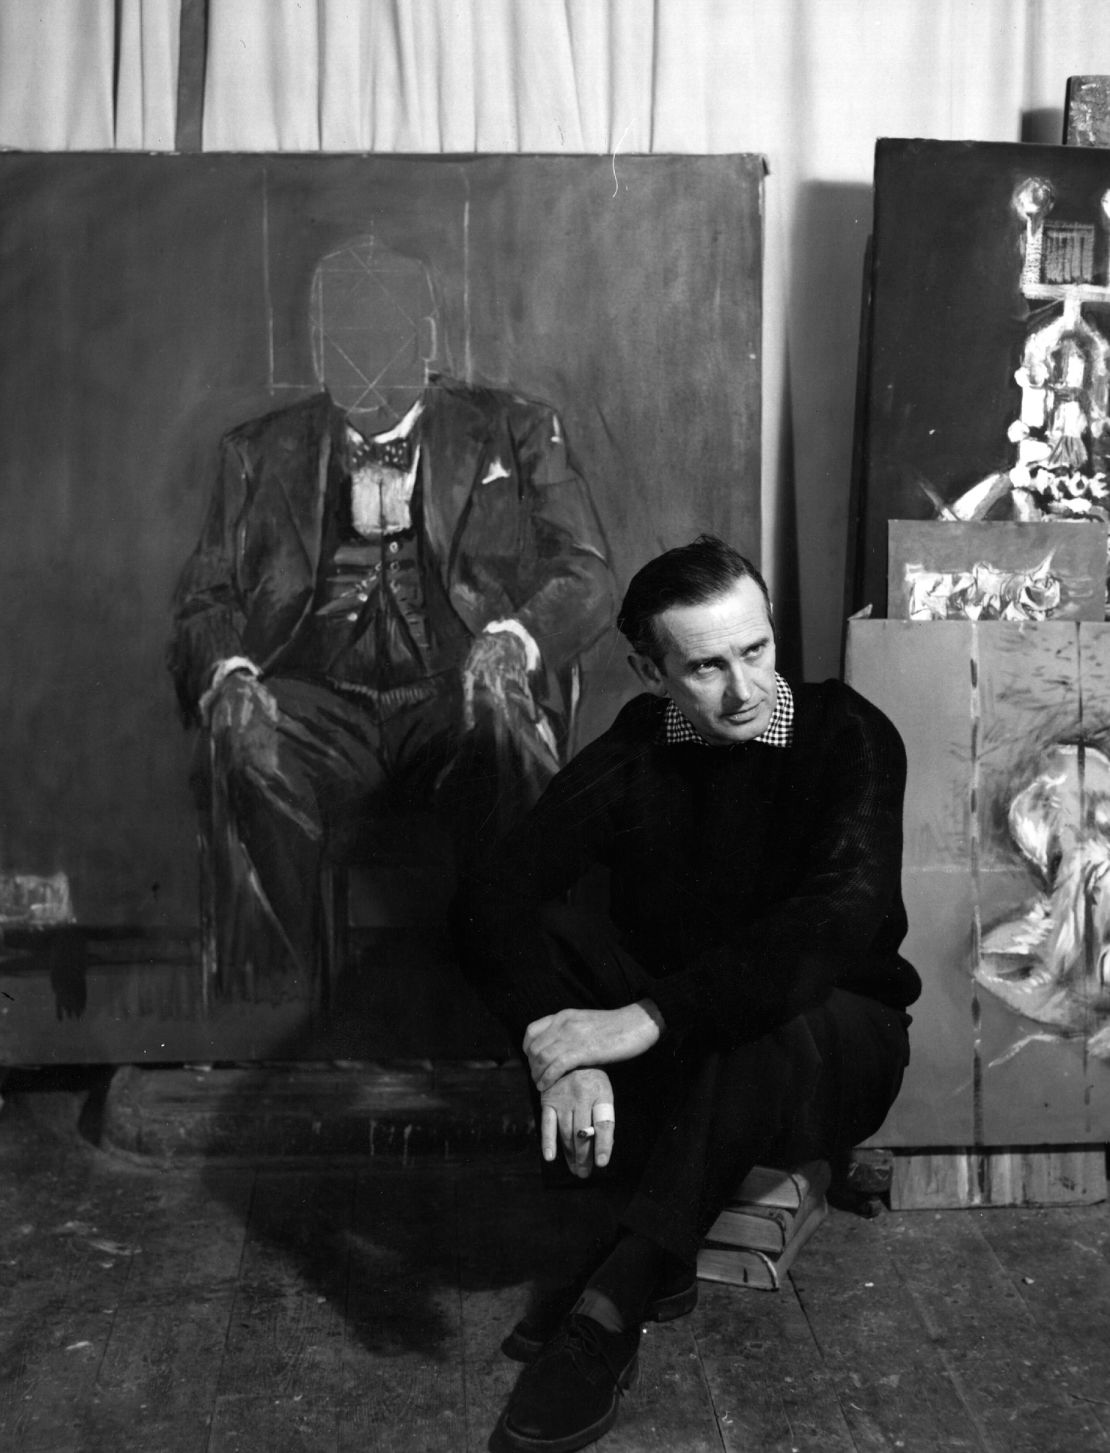 Graham Sutherland, seen with the-then unfinished but eventually much-maligned portrait of Churchill. In Netlfix's depiction of events, Churchill described his appearance in the painting as “a broken, sagging, pitiful creature,” and Sutherland as “a Judas wielding his murderous brush.”